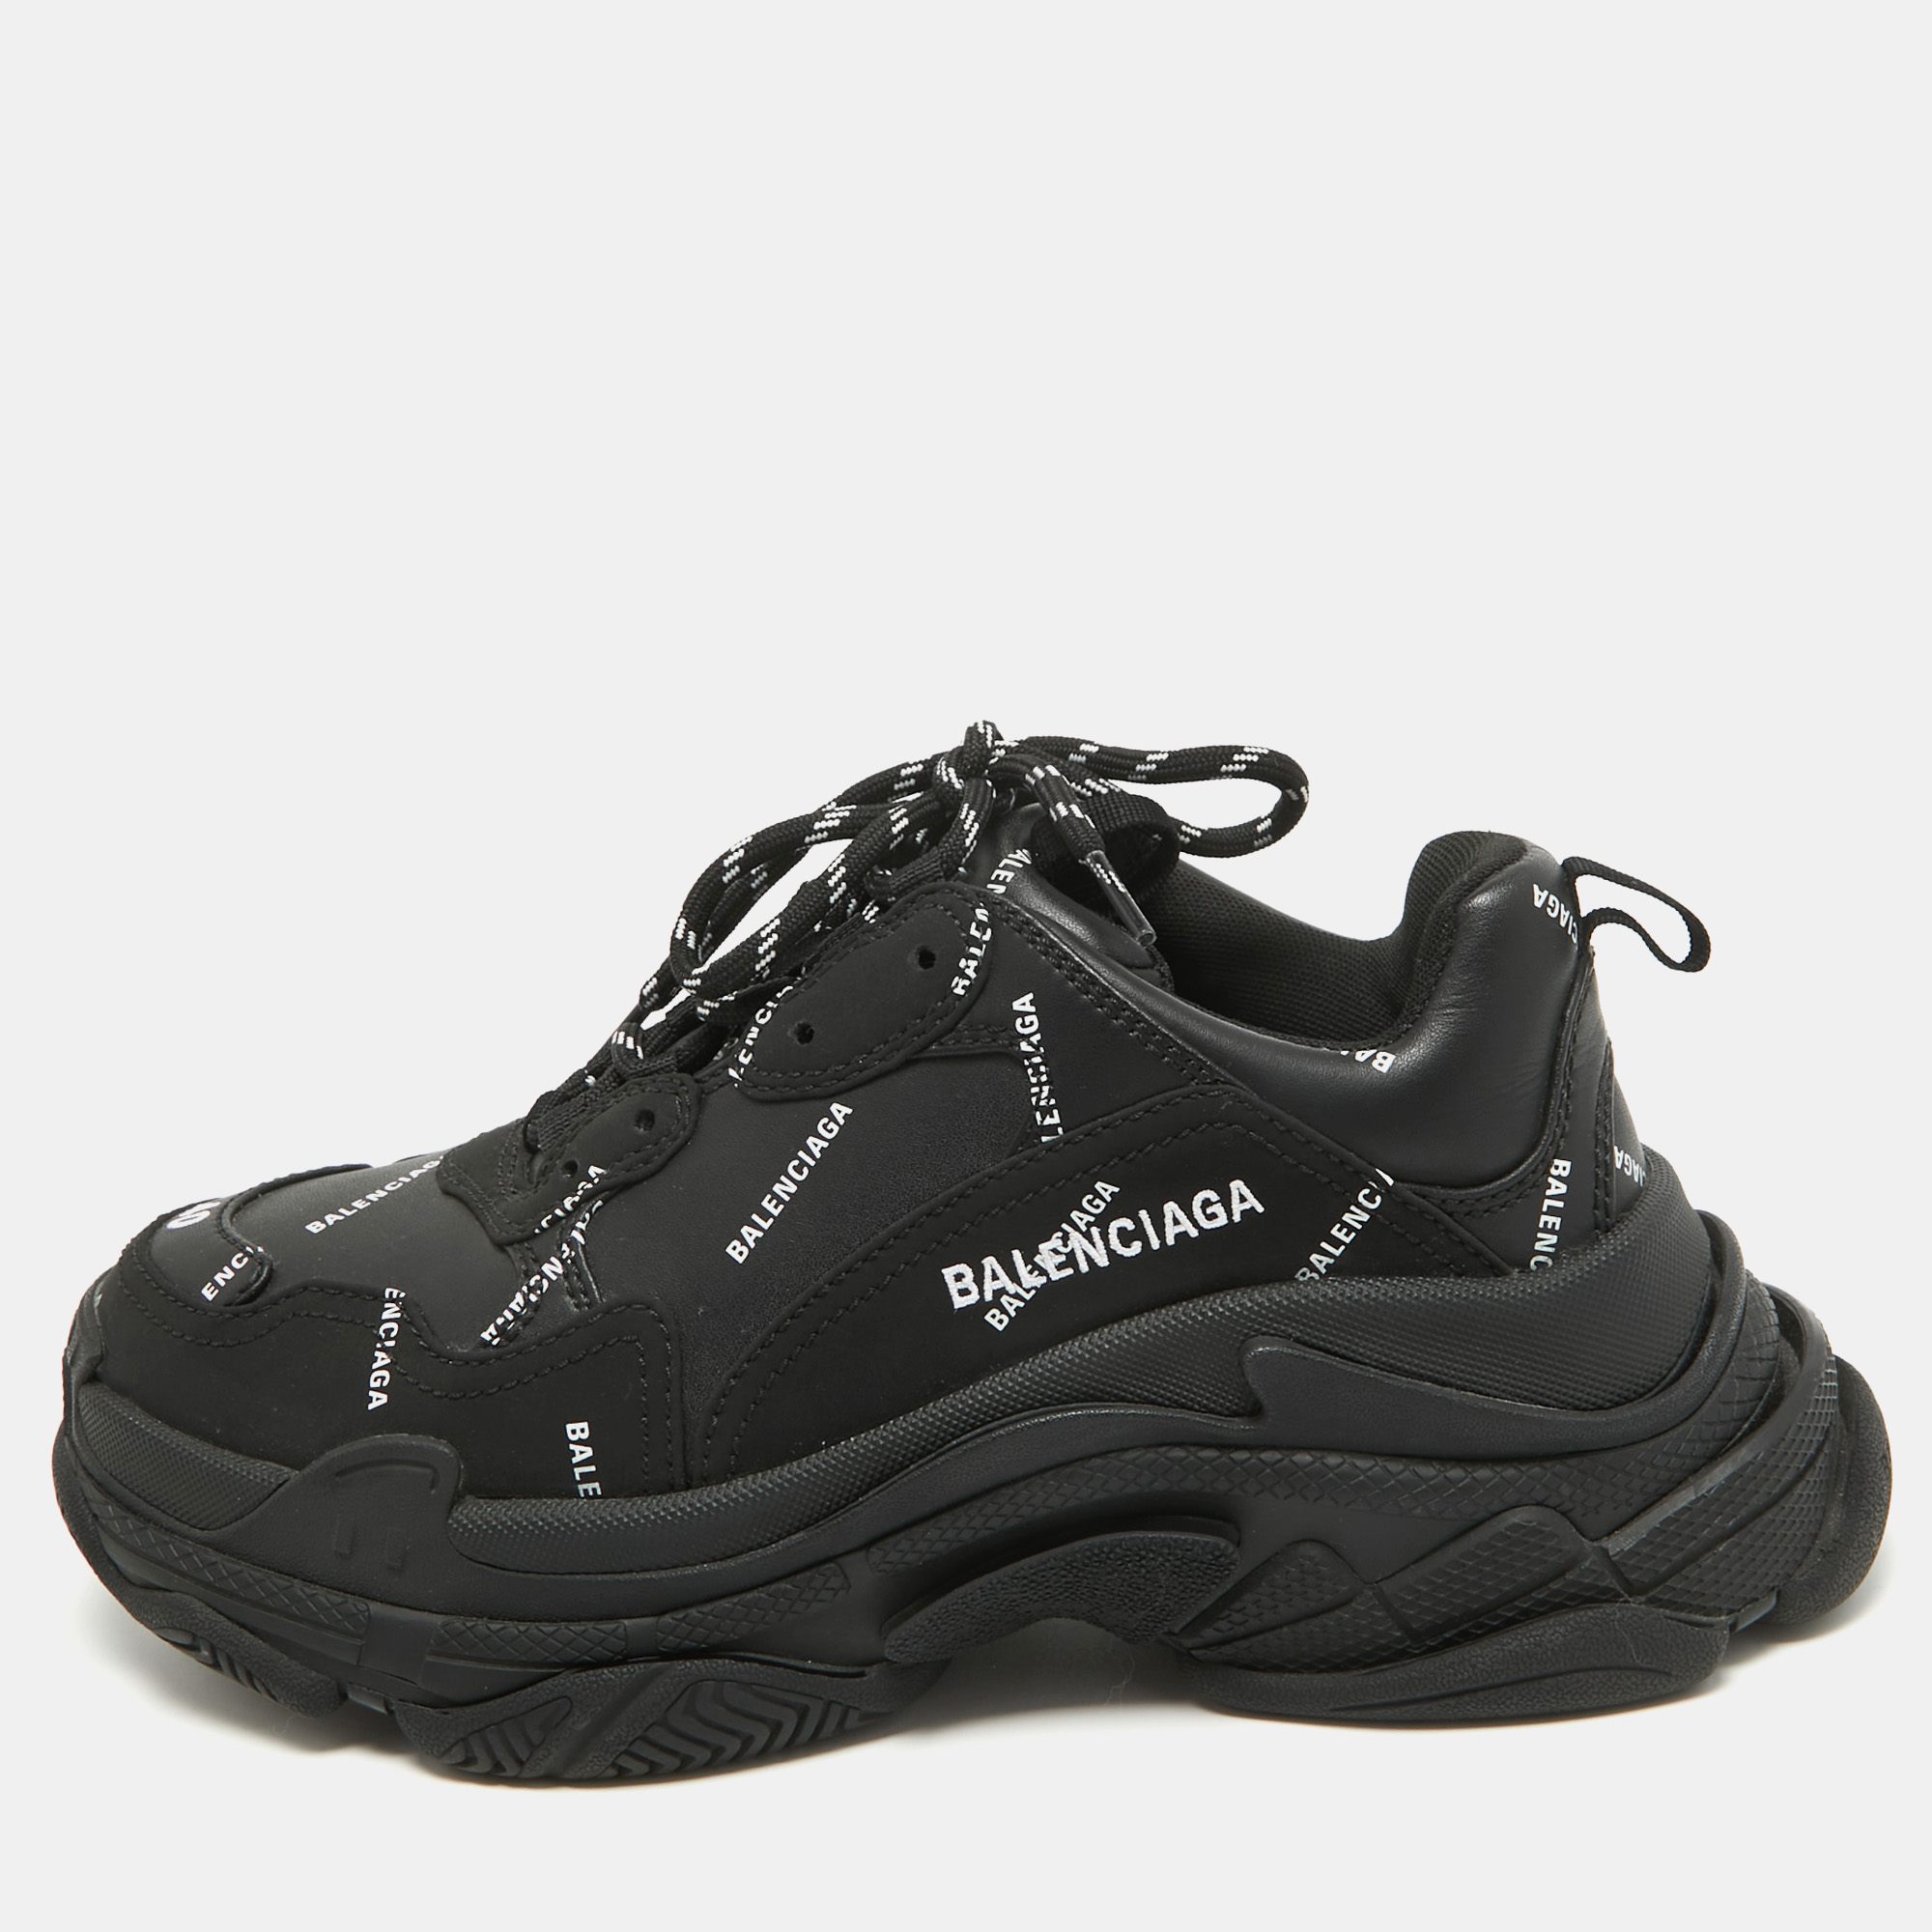 Upgrade your style with these Balenciaga sneakers. Meticulously designed for fashion and comfort theyre the ideal choice for a trendy and comfortable stride.